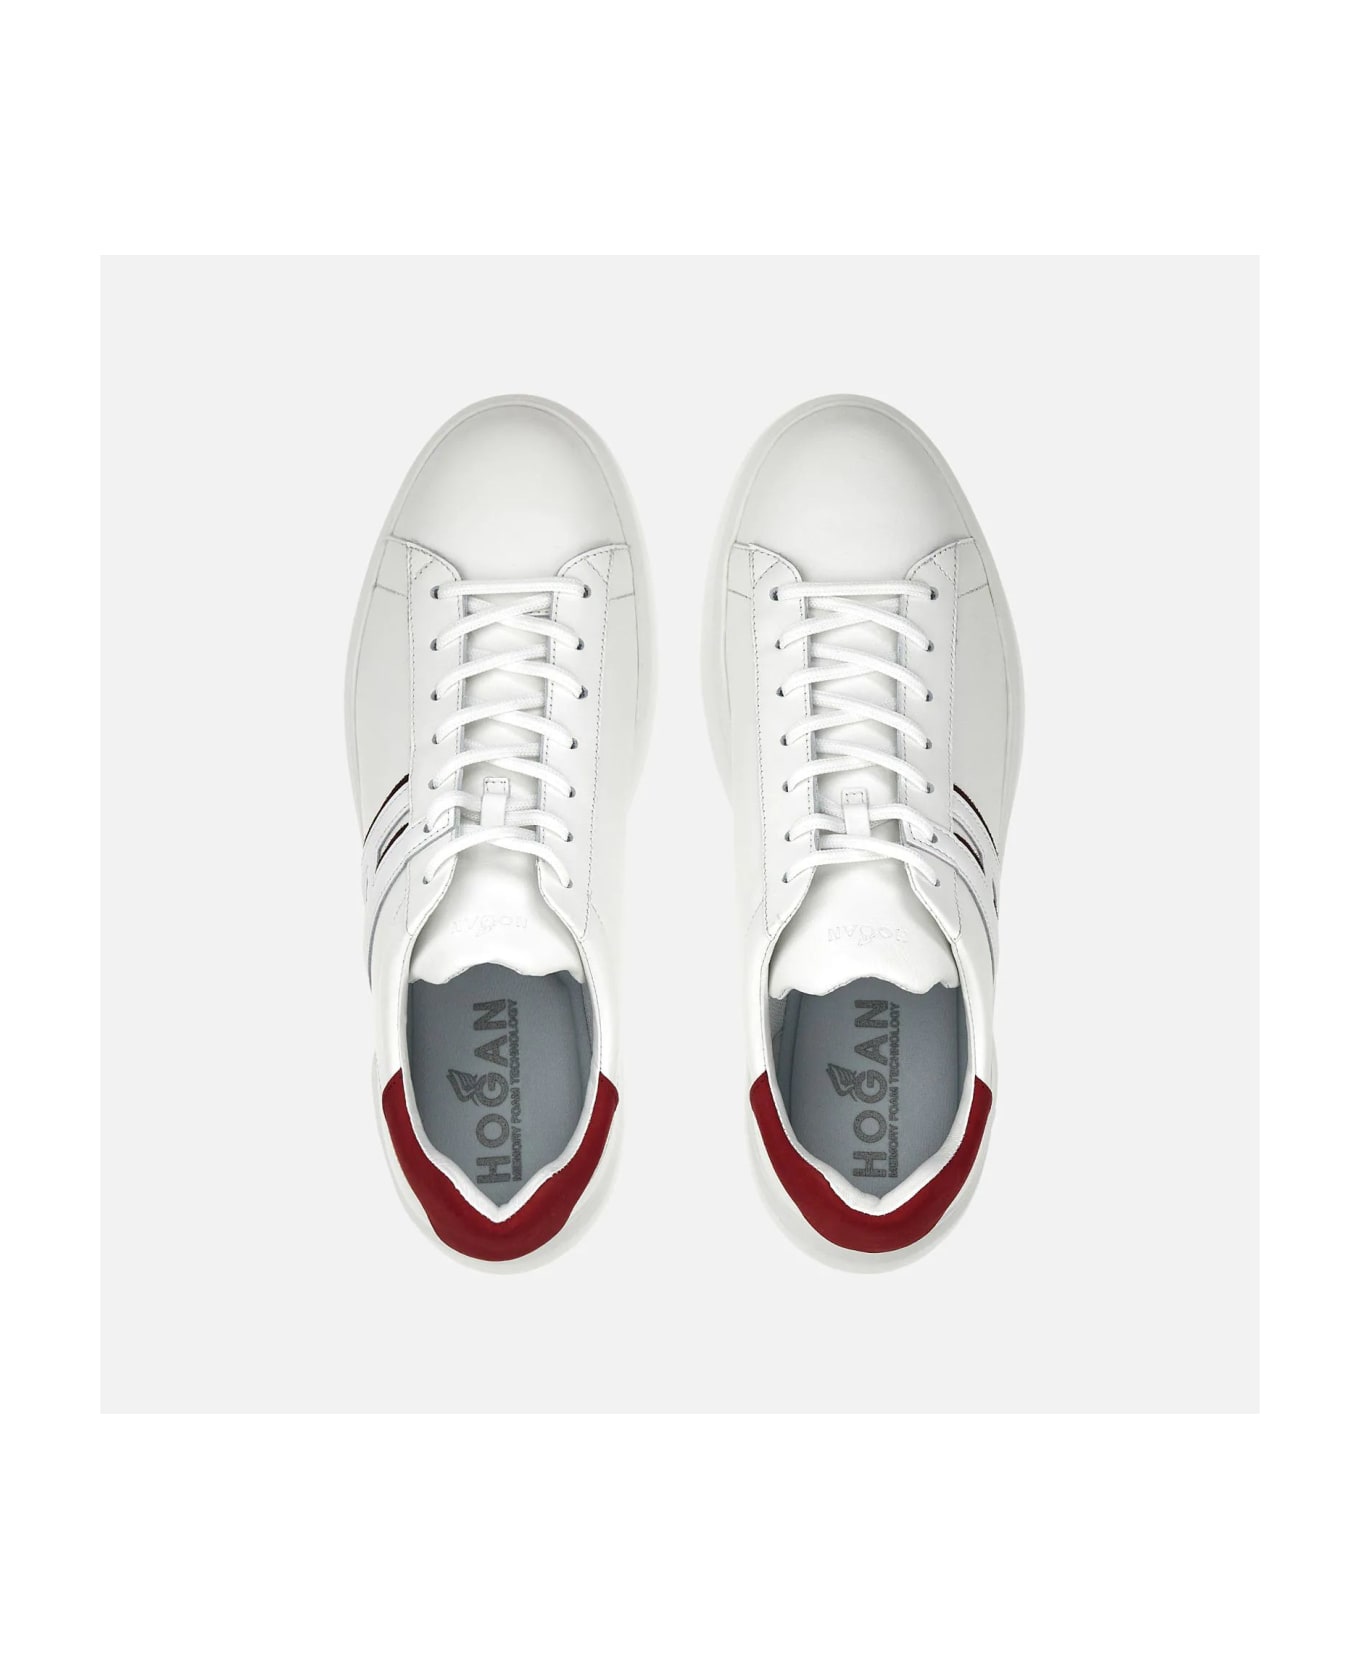 Hogan H580 Sneakers - Bianco/rosso